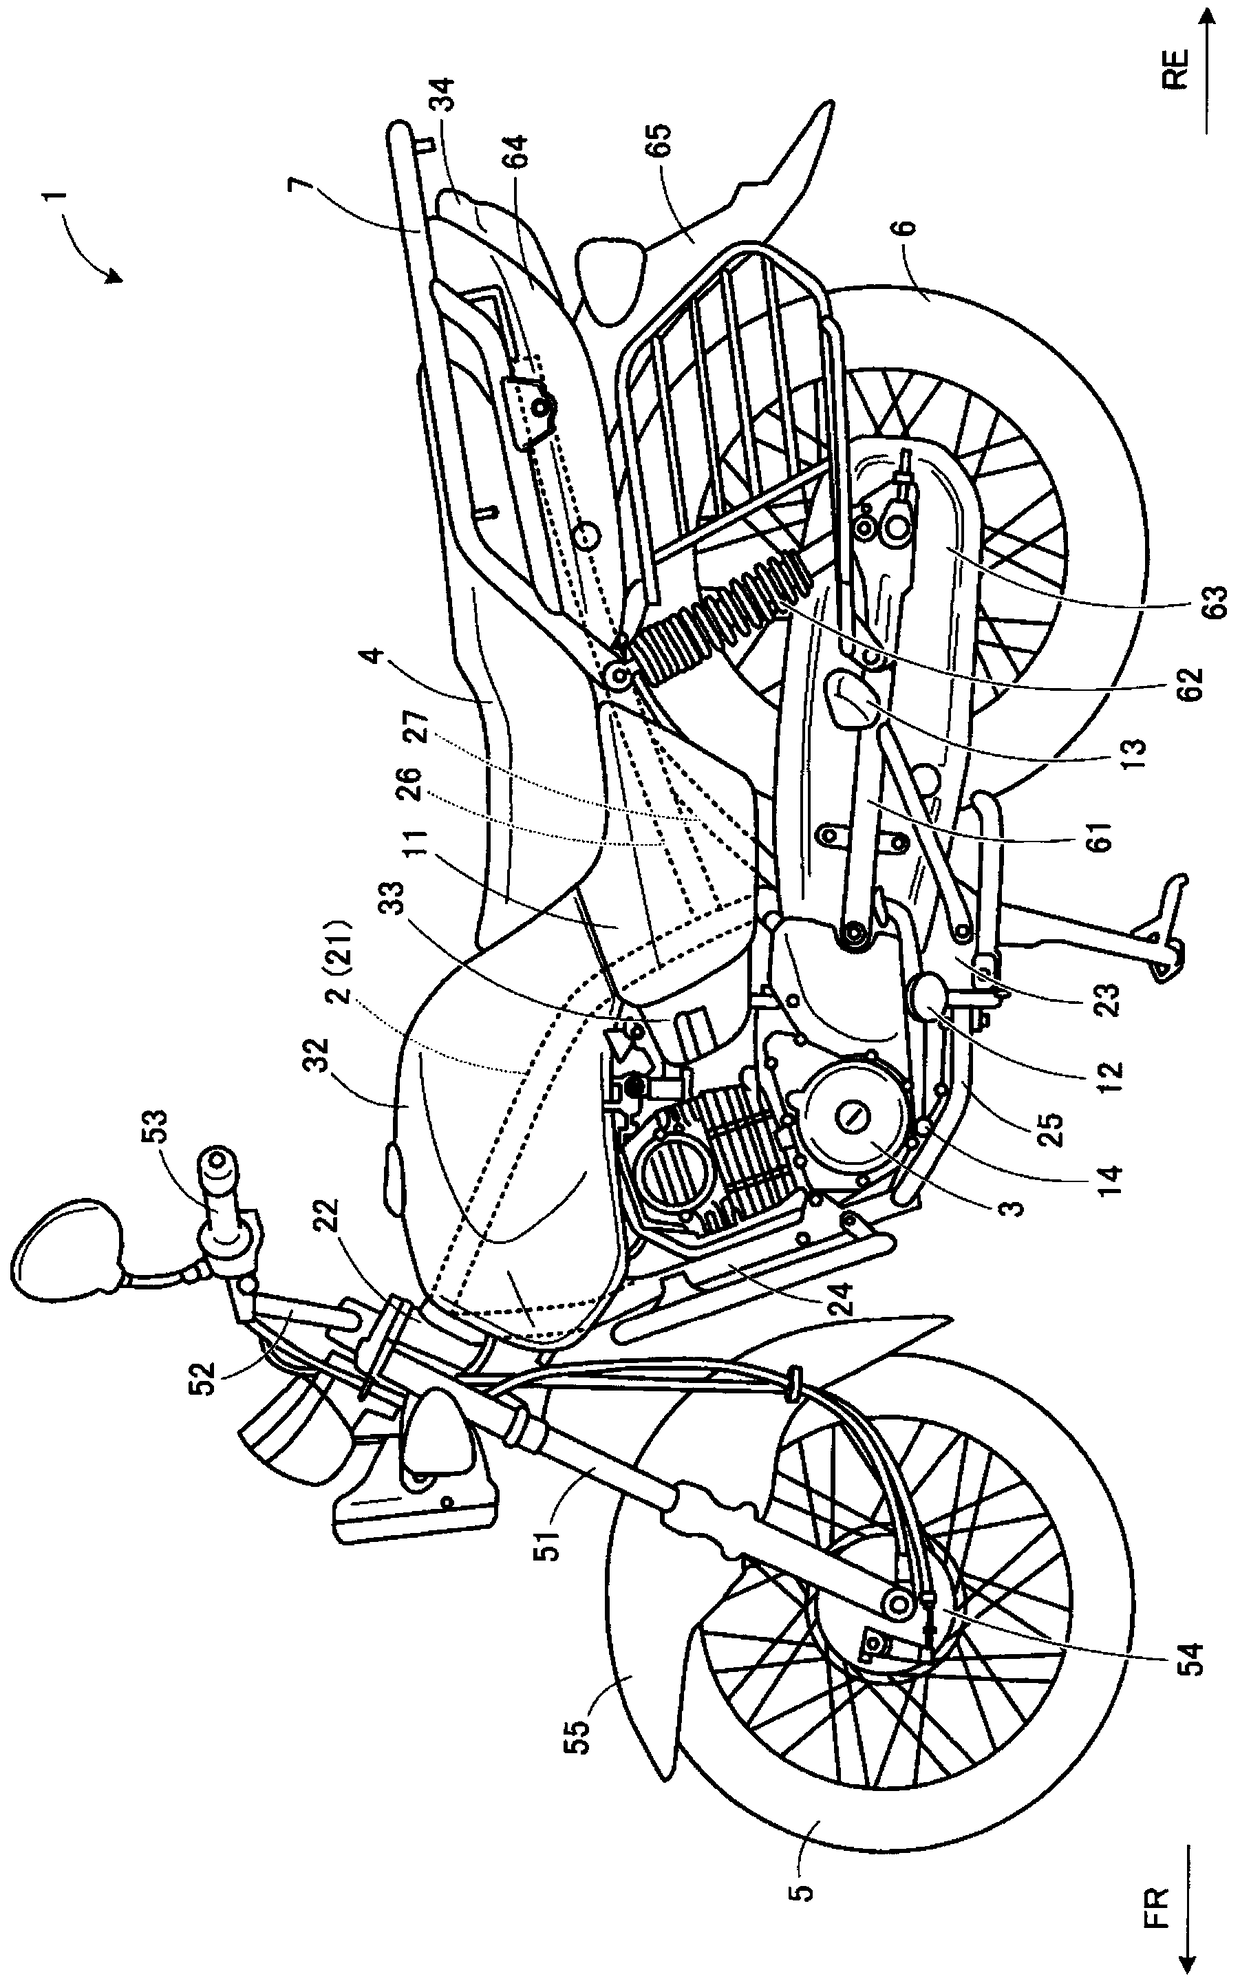 Blow-by ventilation device for internal combustion engine